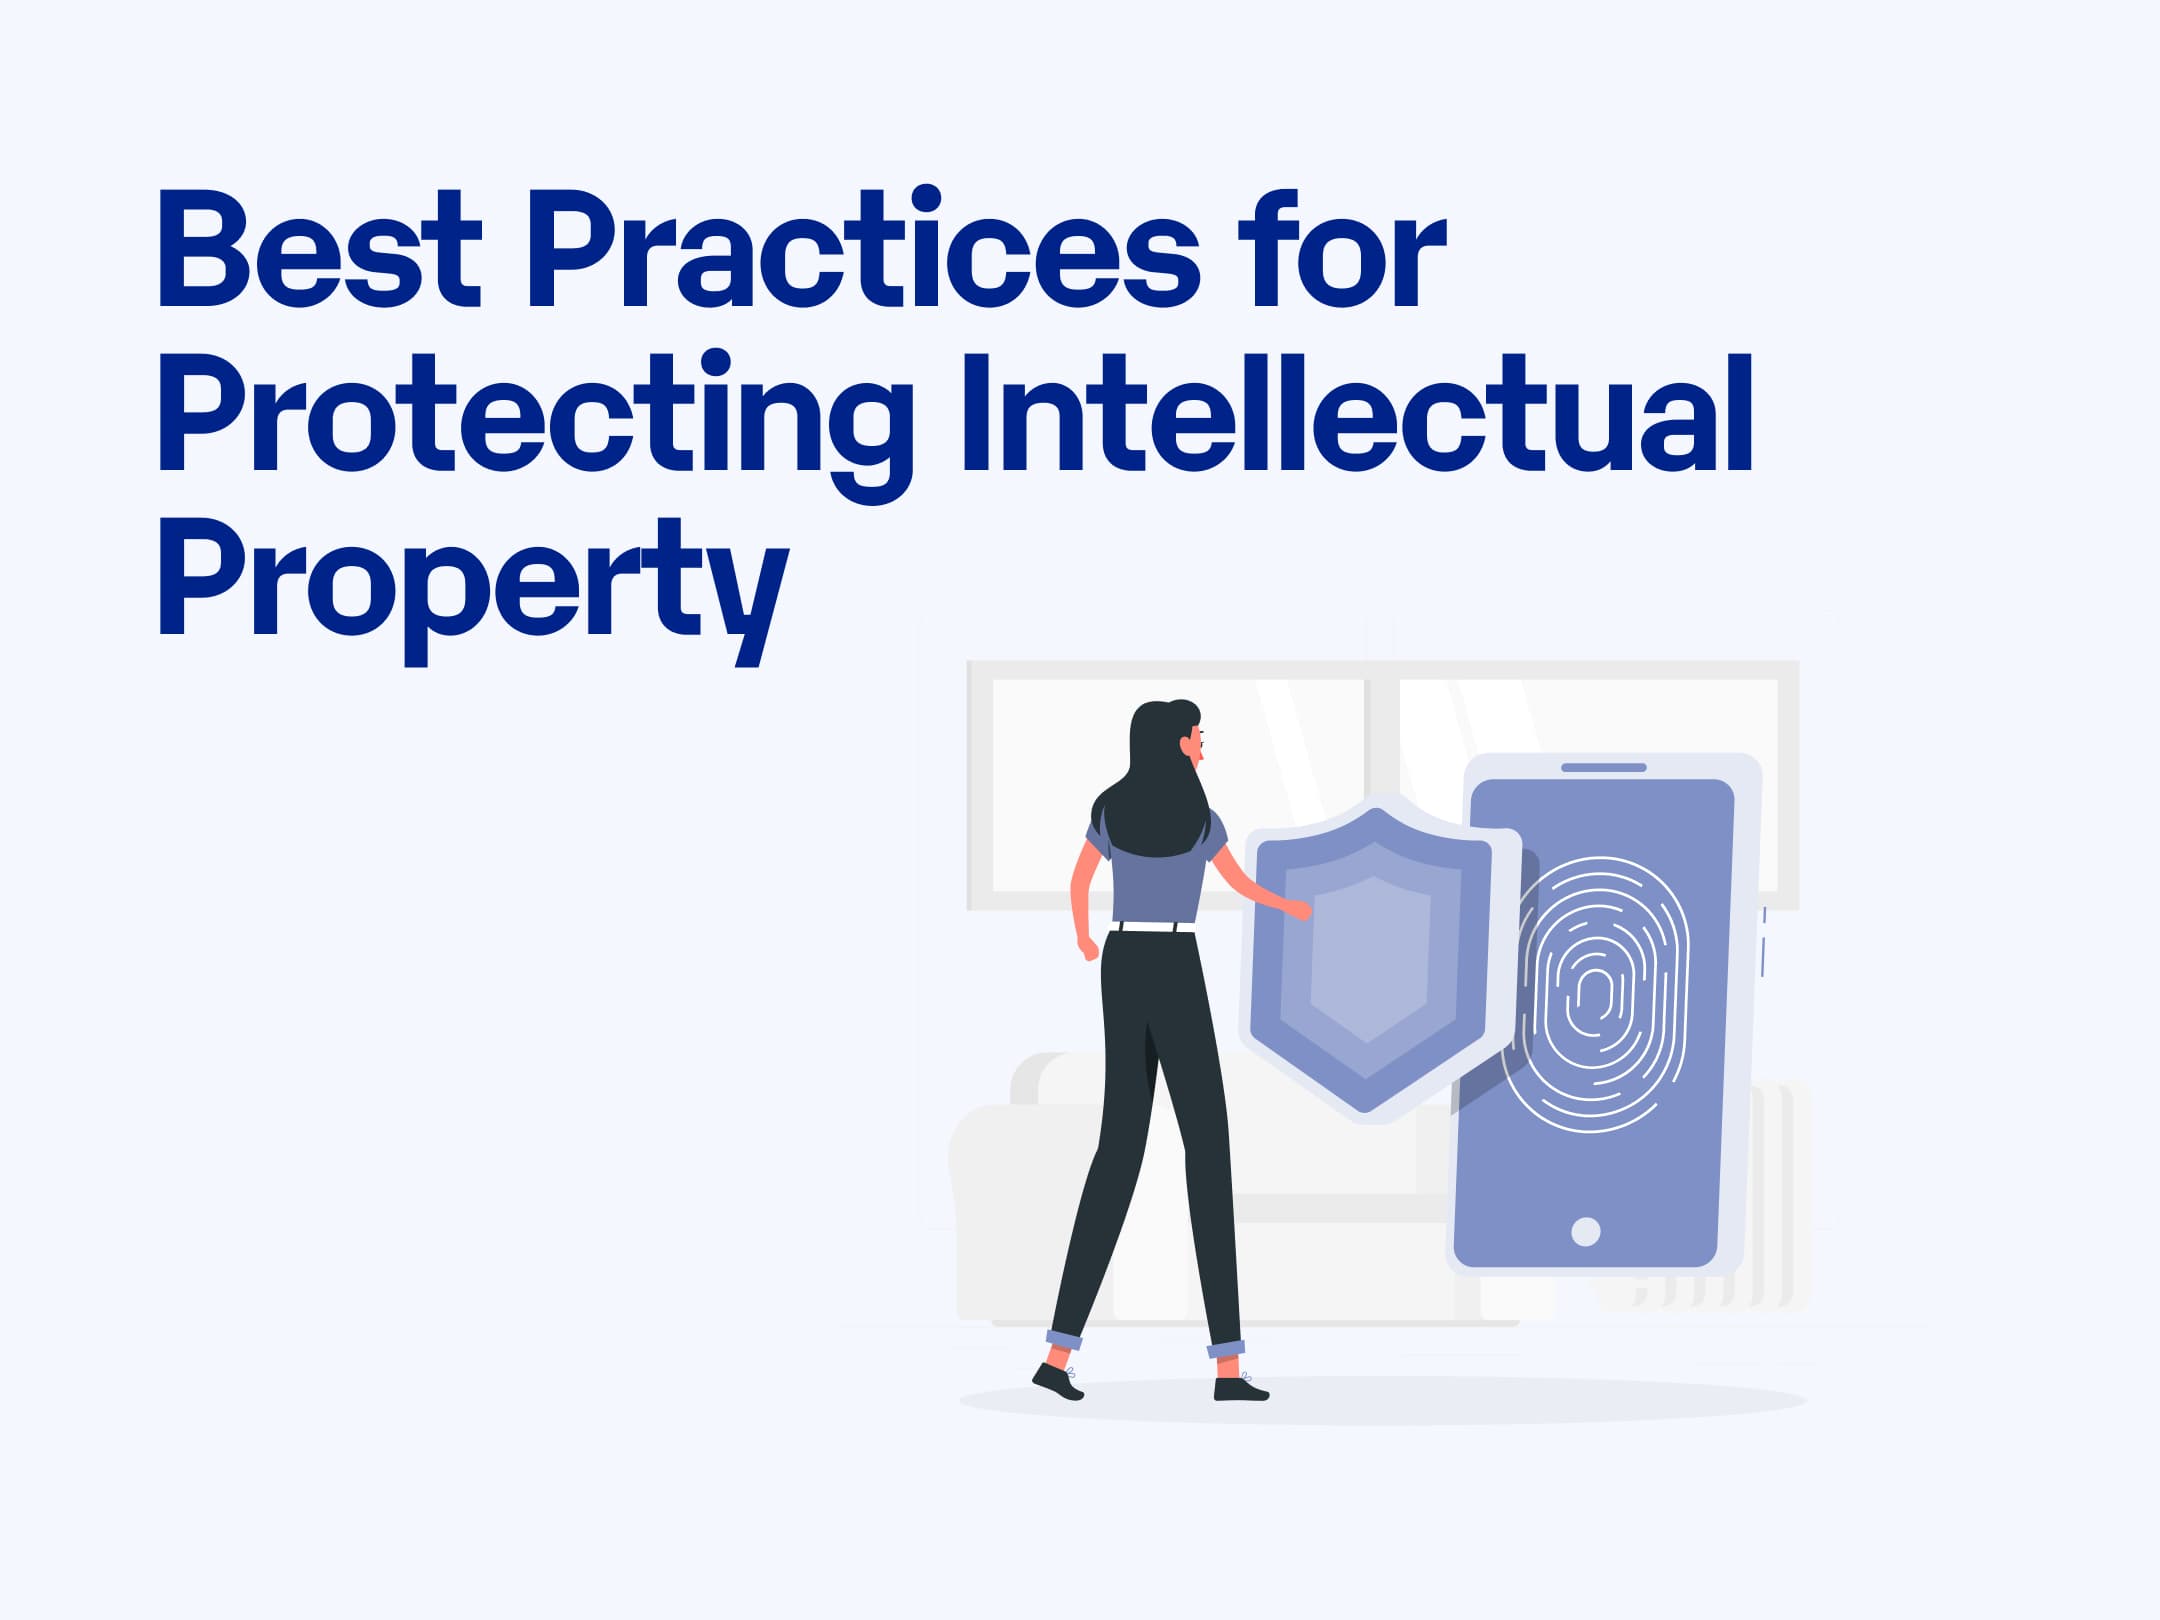 Best Practices for Protecting Intellectual Property